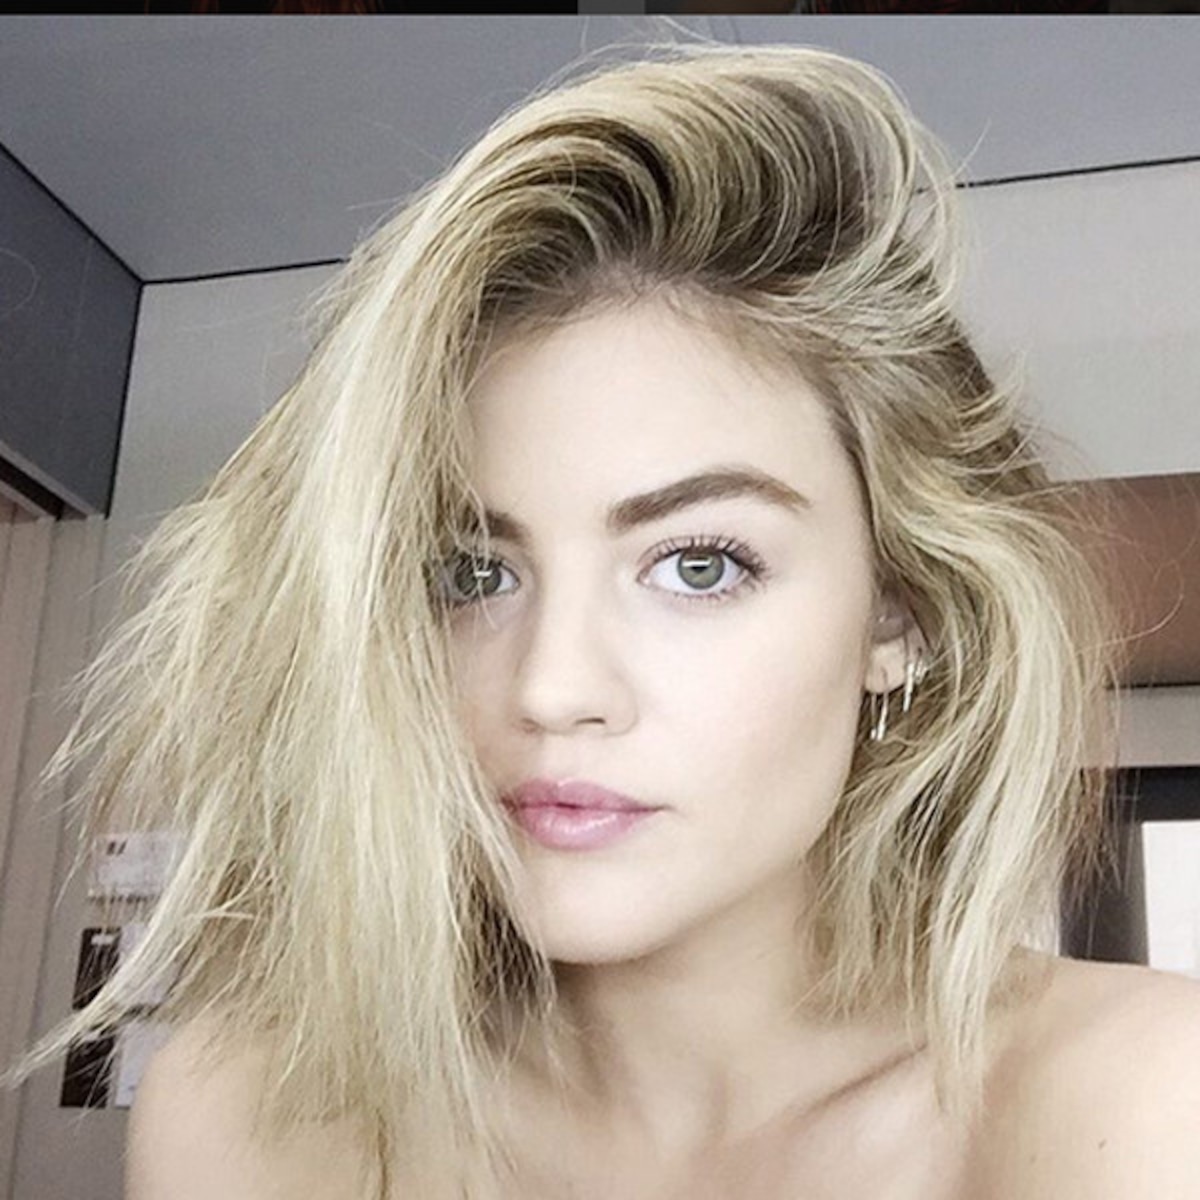 Leaked lucy hale pics